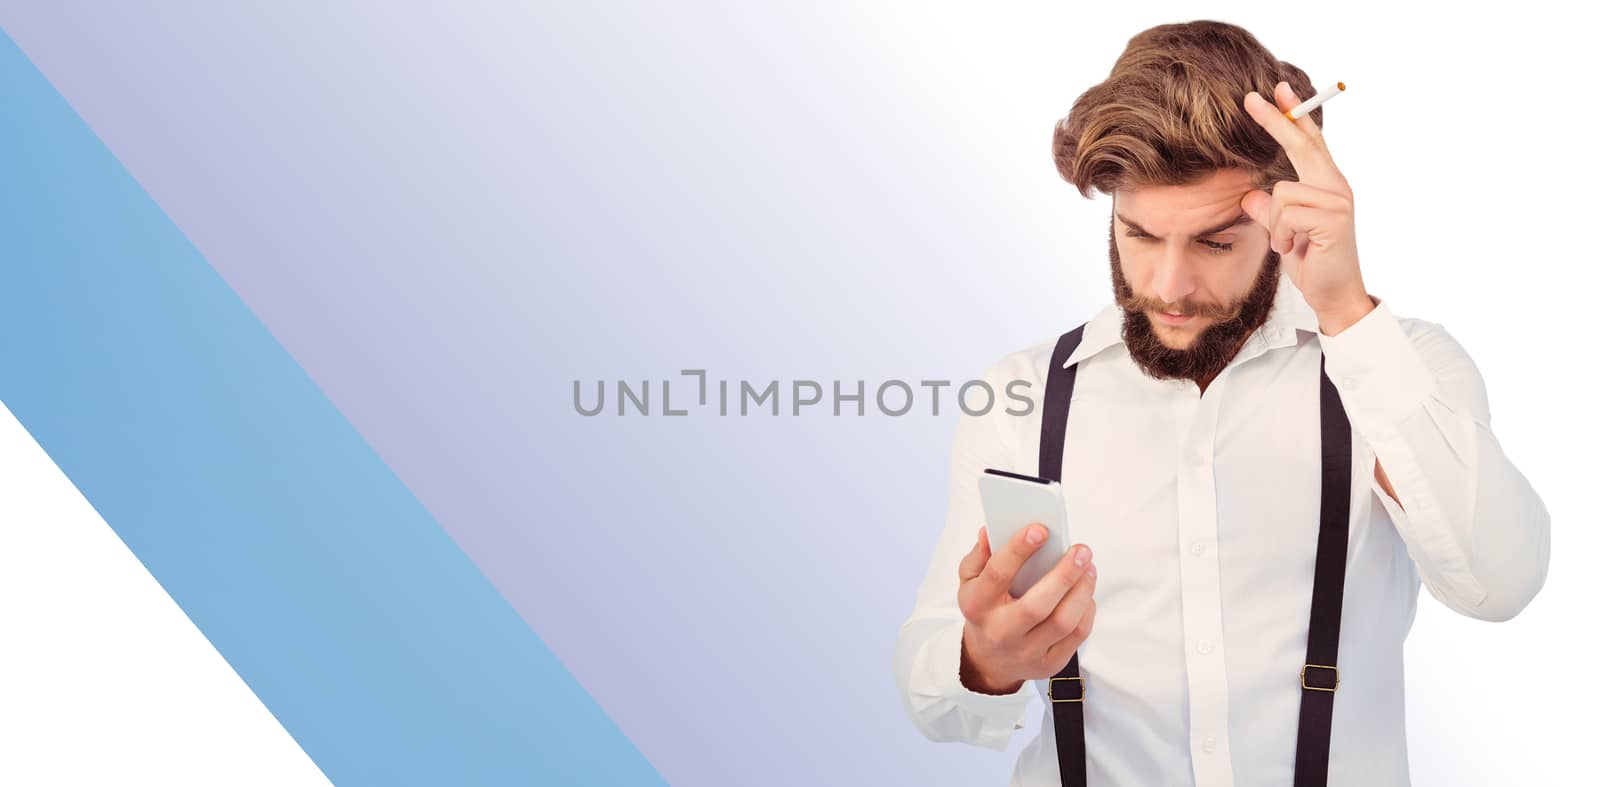 Hipster looking in mobile phonewhile holding cigarette against blue vignette background